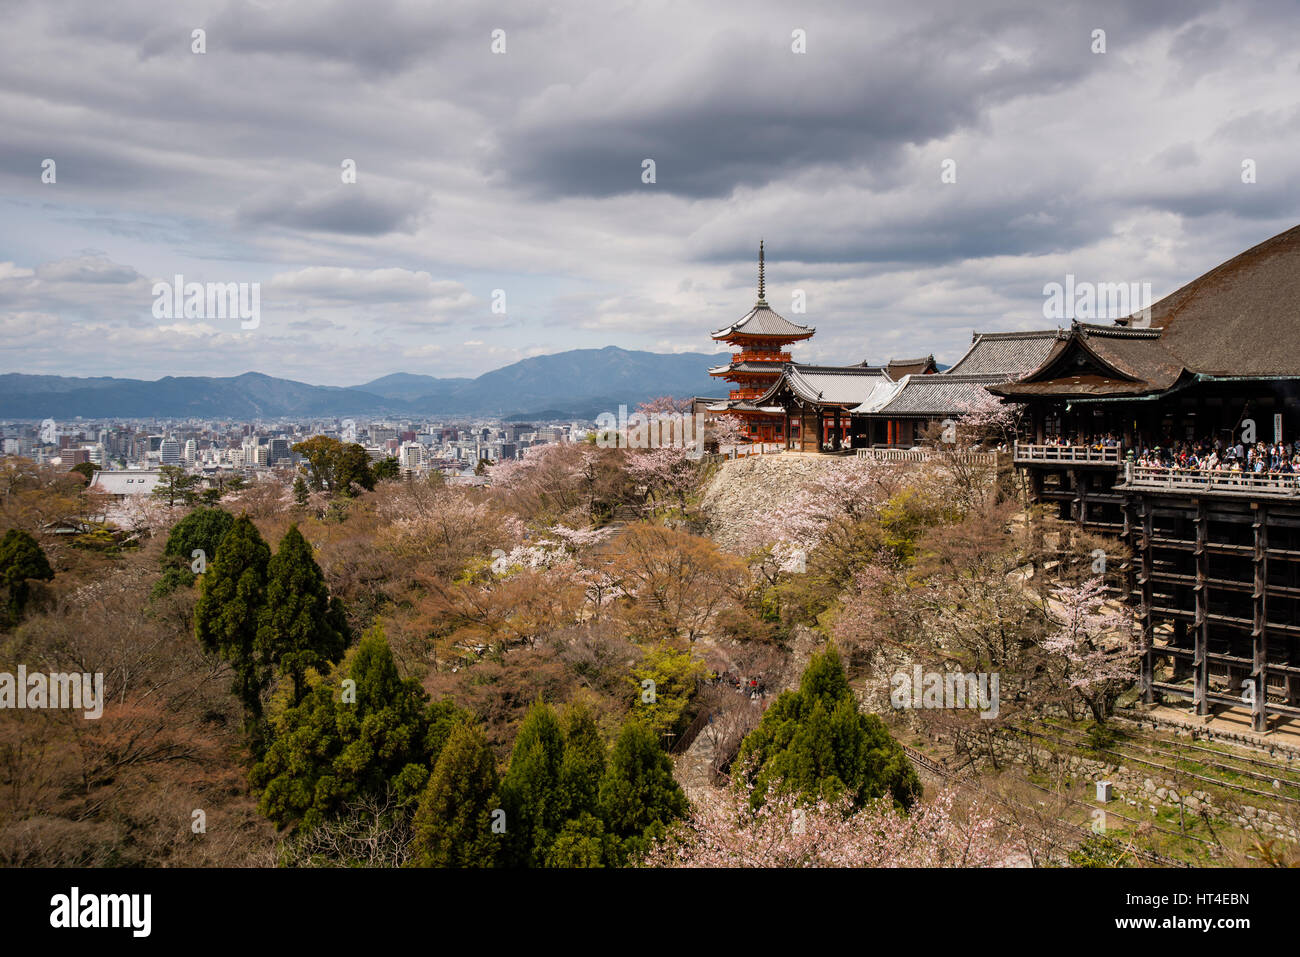 View of Kiyomizu dera, Buddisht Temple, with the city of Kyoto in the background, Japan Stock Photo